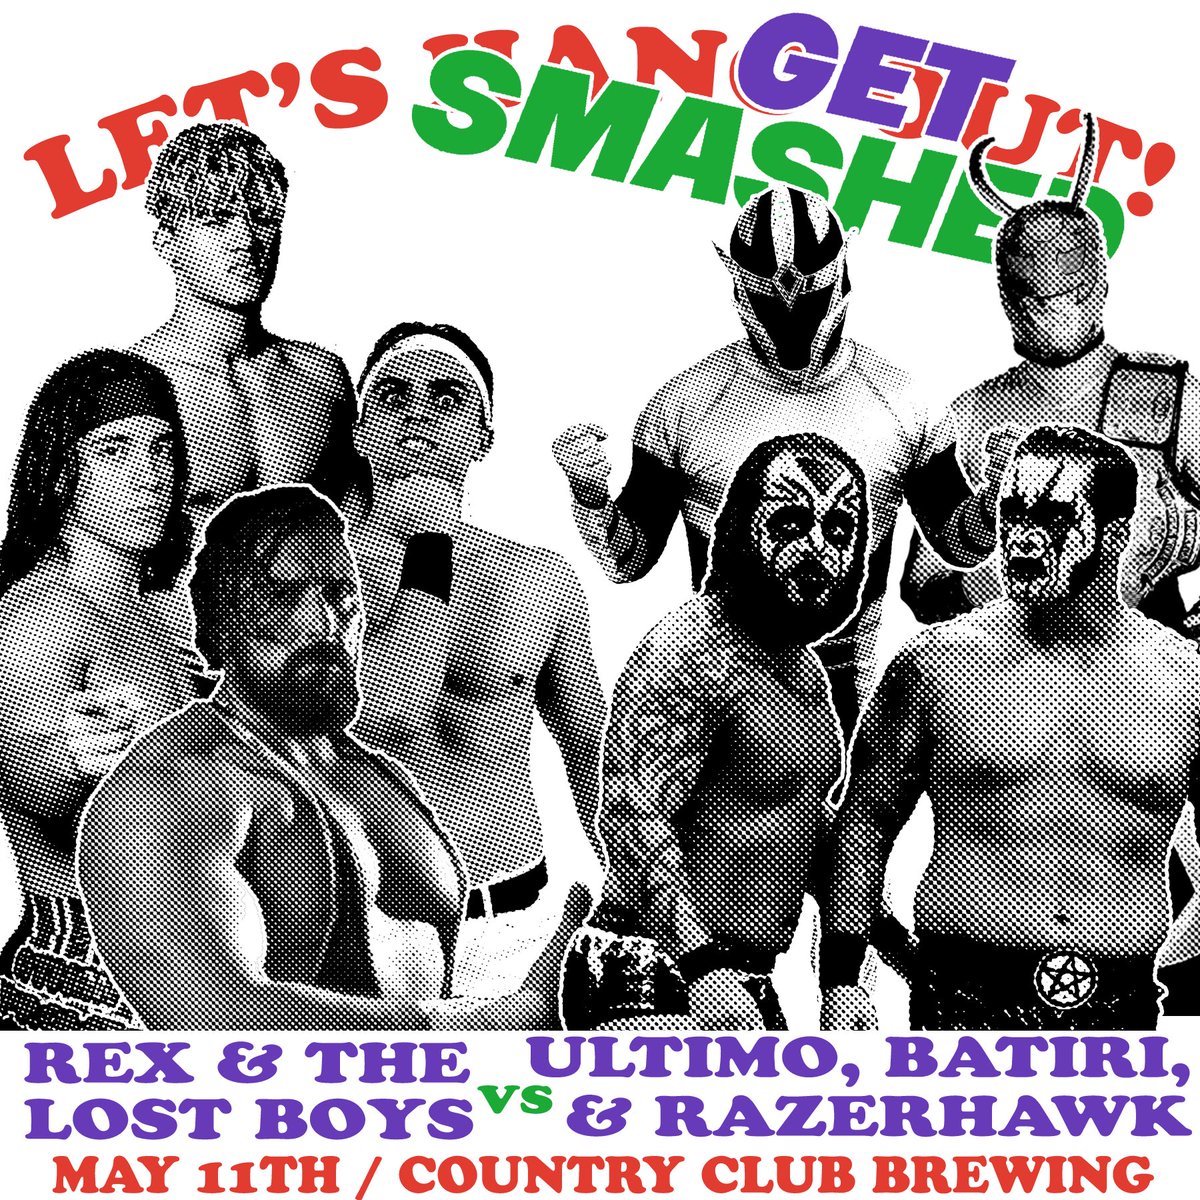 Saturday! May 11th! Come see the trio of cocky upstarts known as the Lost Boys tag with dreaded heavy @RexLawless1 against @UltimoAnt, @RazerhawkX2K, & @TheBatiri ! Admission is FREE with a donation to LV Humane Society! Bell at 2pm! Rain or shine (moving to sokols if it rains)